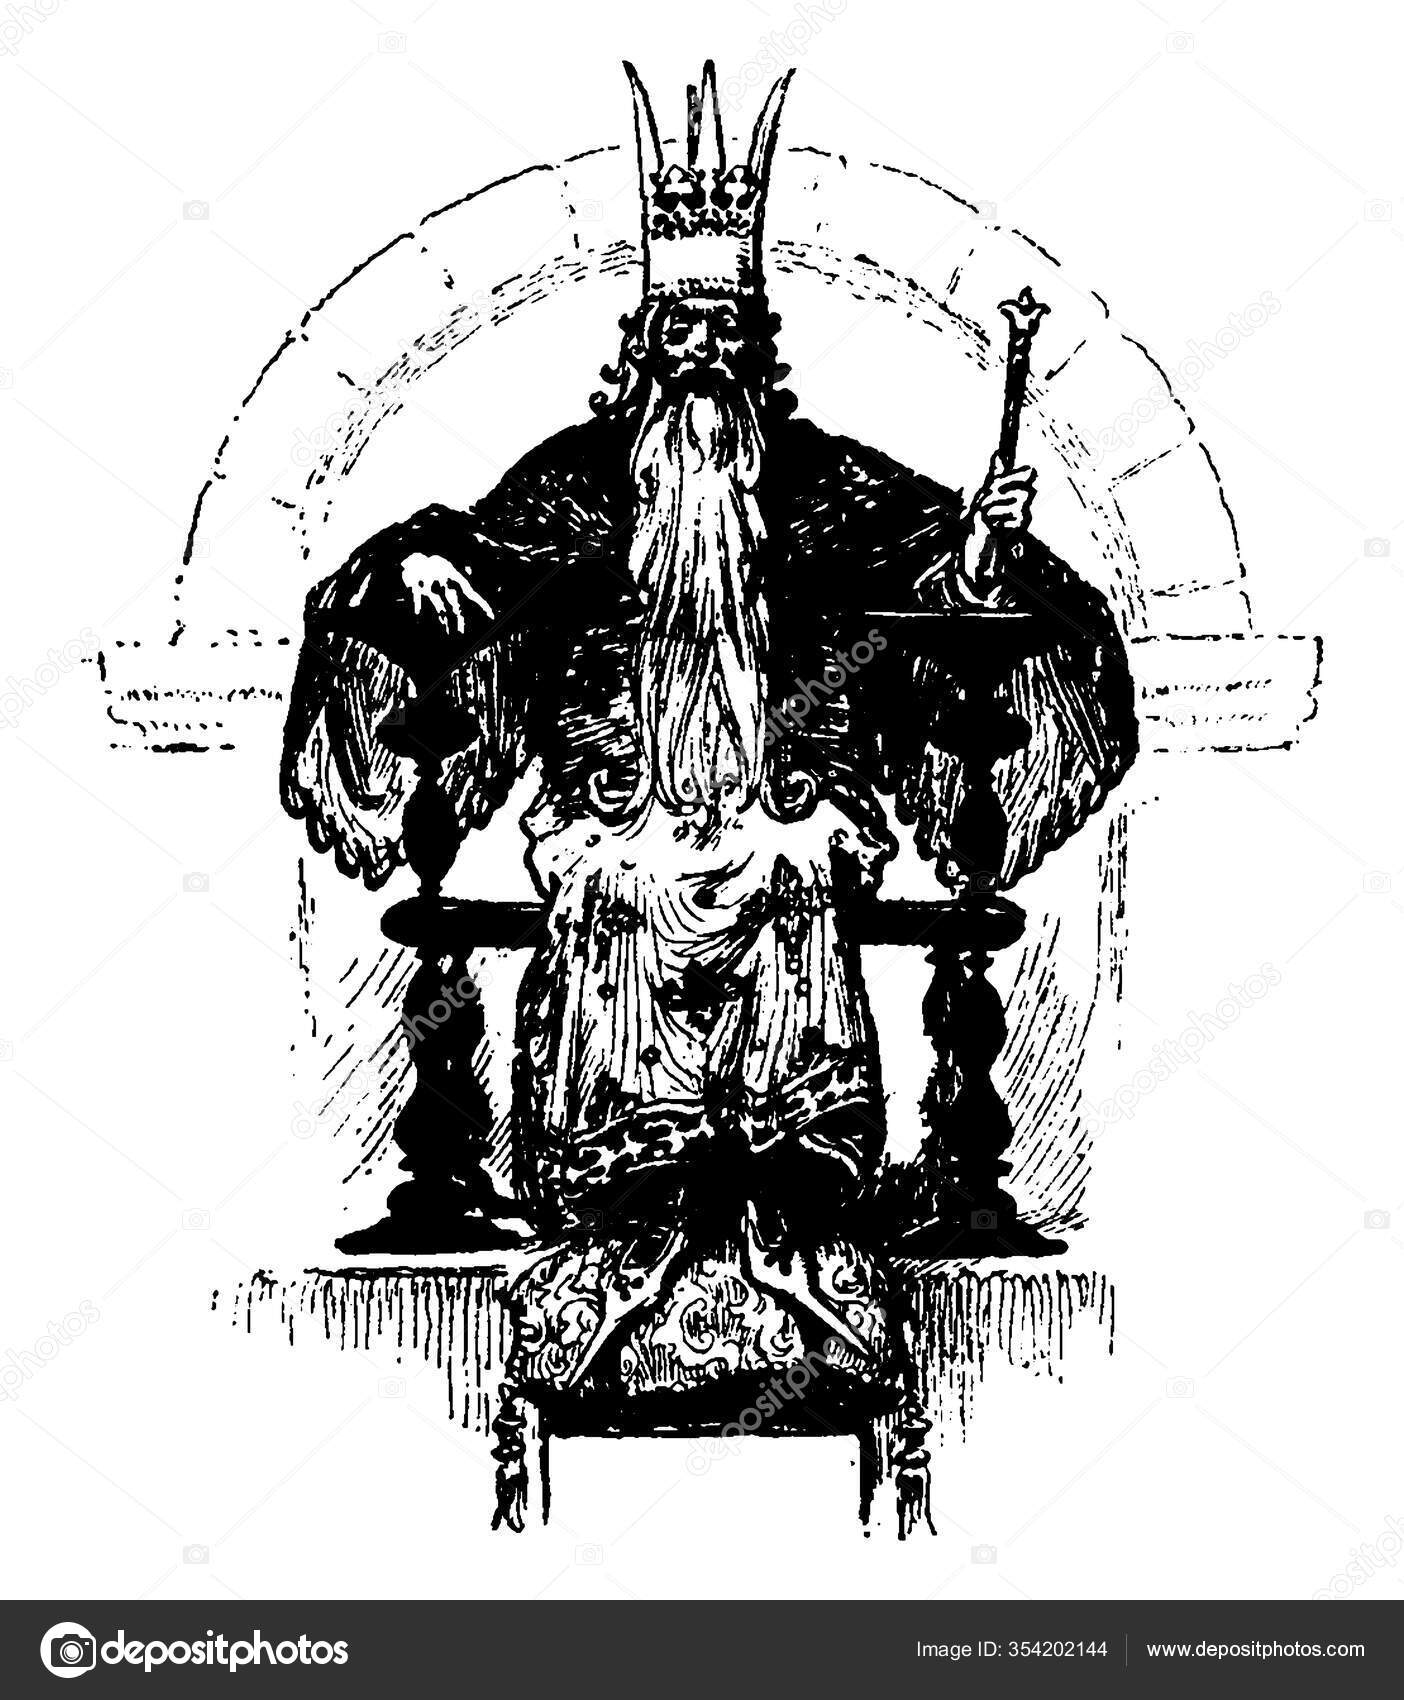 Download - The king with crown on head sitting on throne and holding staff ...